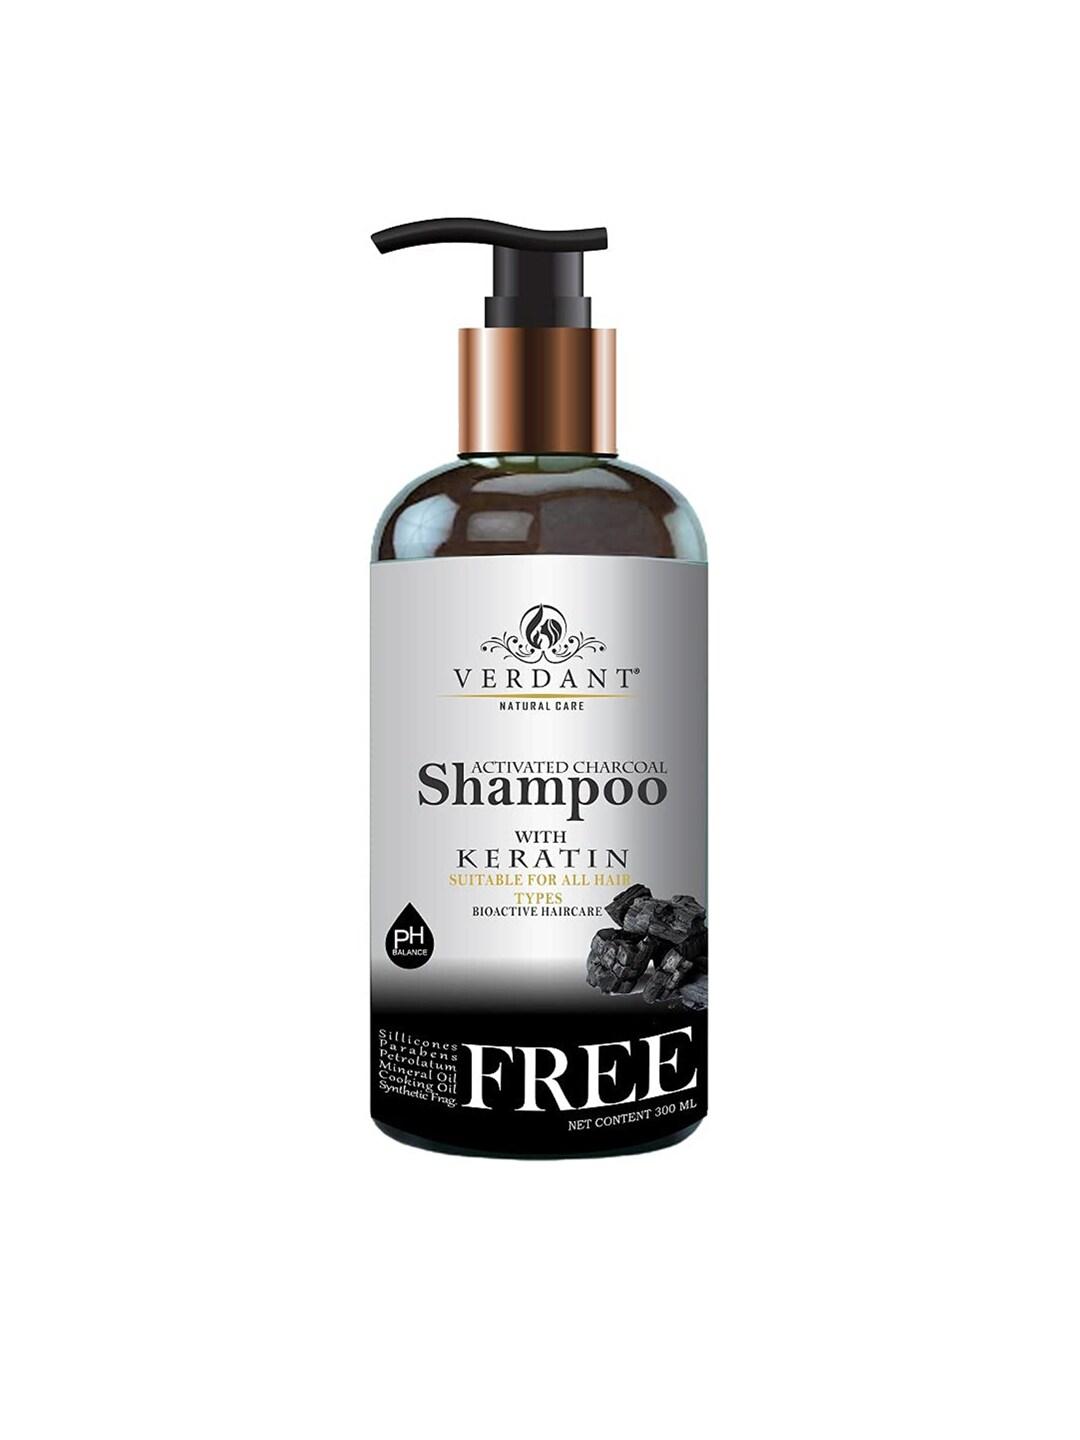 Verdant Natural Care Activated Charcoal Shampoo with Keratin - 300 ml